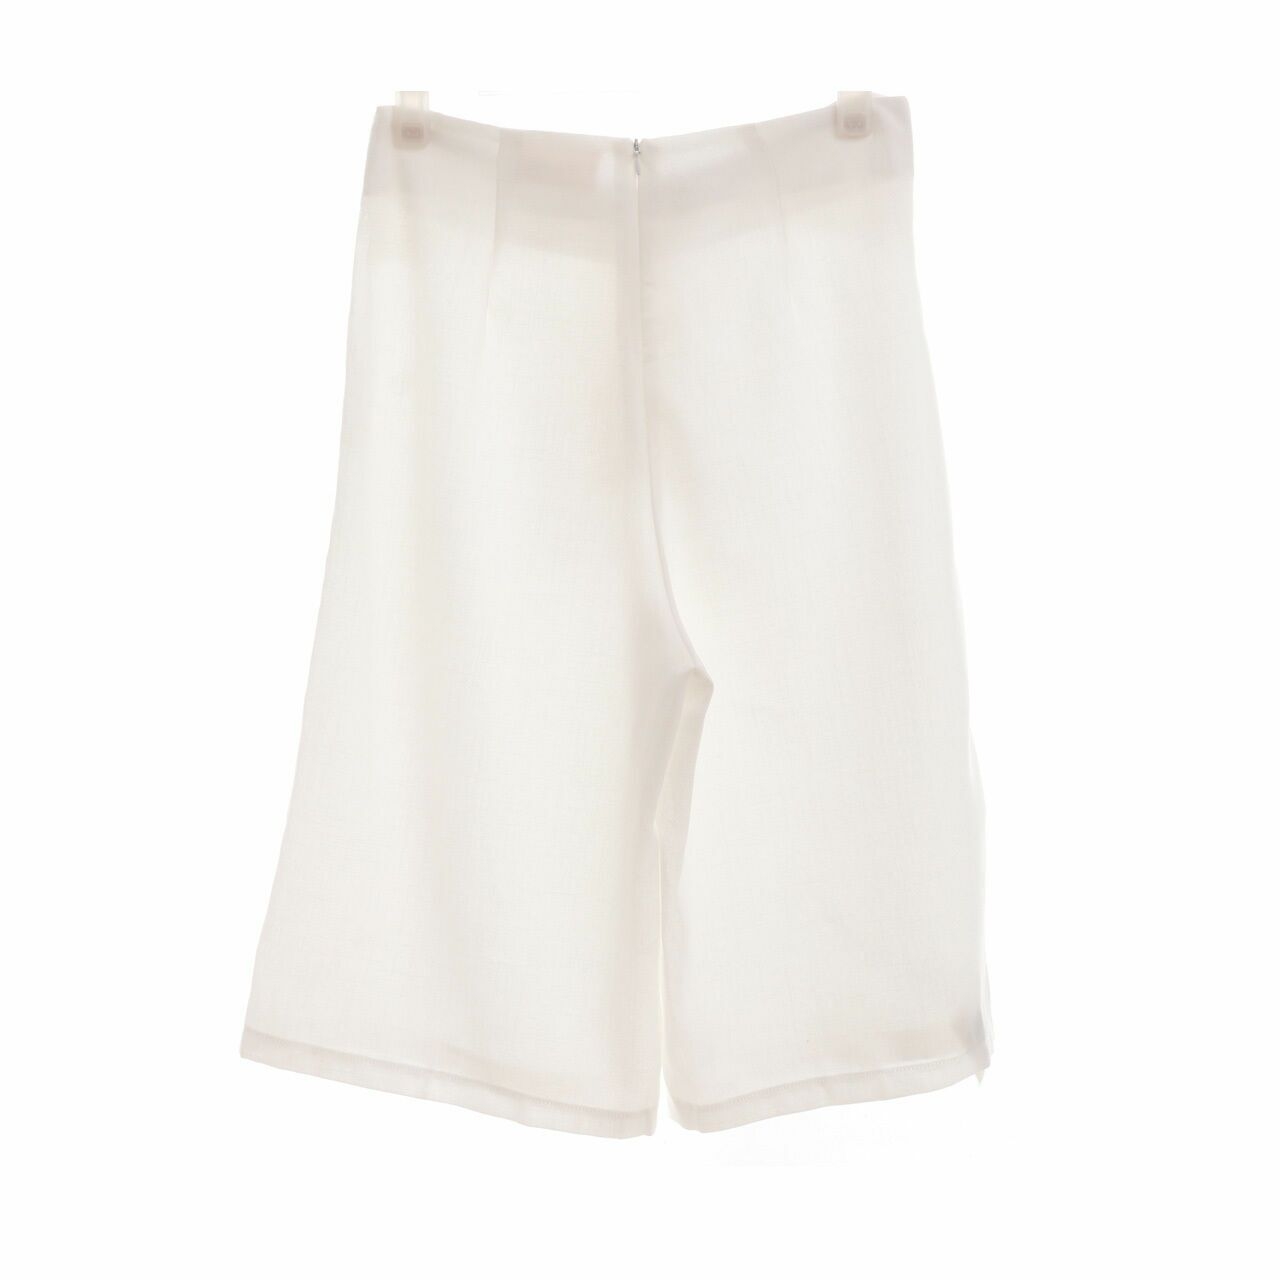 This is April White Cropped Pants